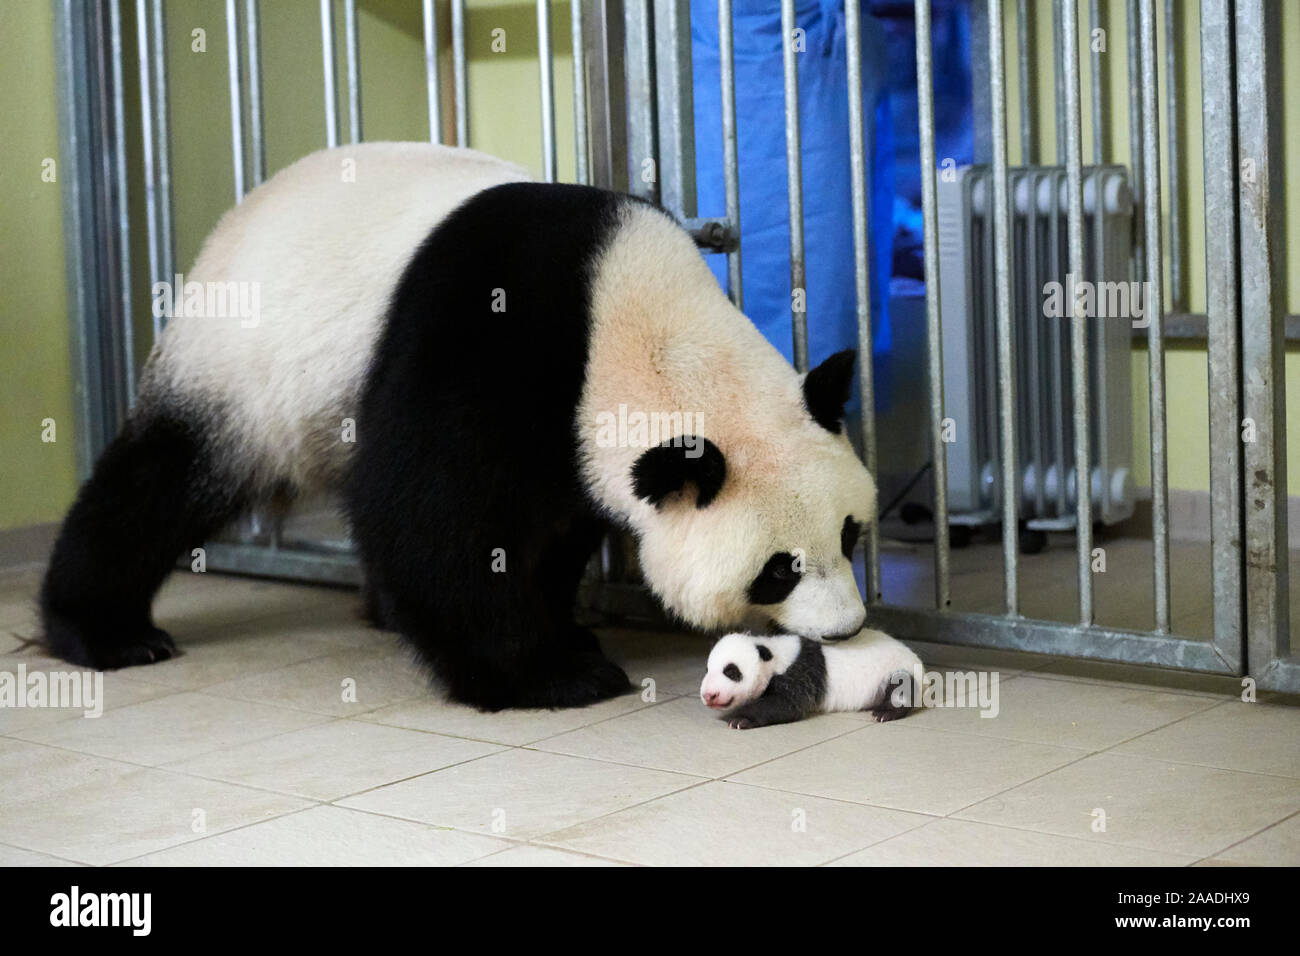 Giant panda (Ailuropoda melanoleuca) mother Huan Huan, picking up baby, age one month, Beauval Zoo, France. Sequence 3 of 5 September 2017. Stock Photo